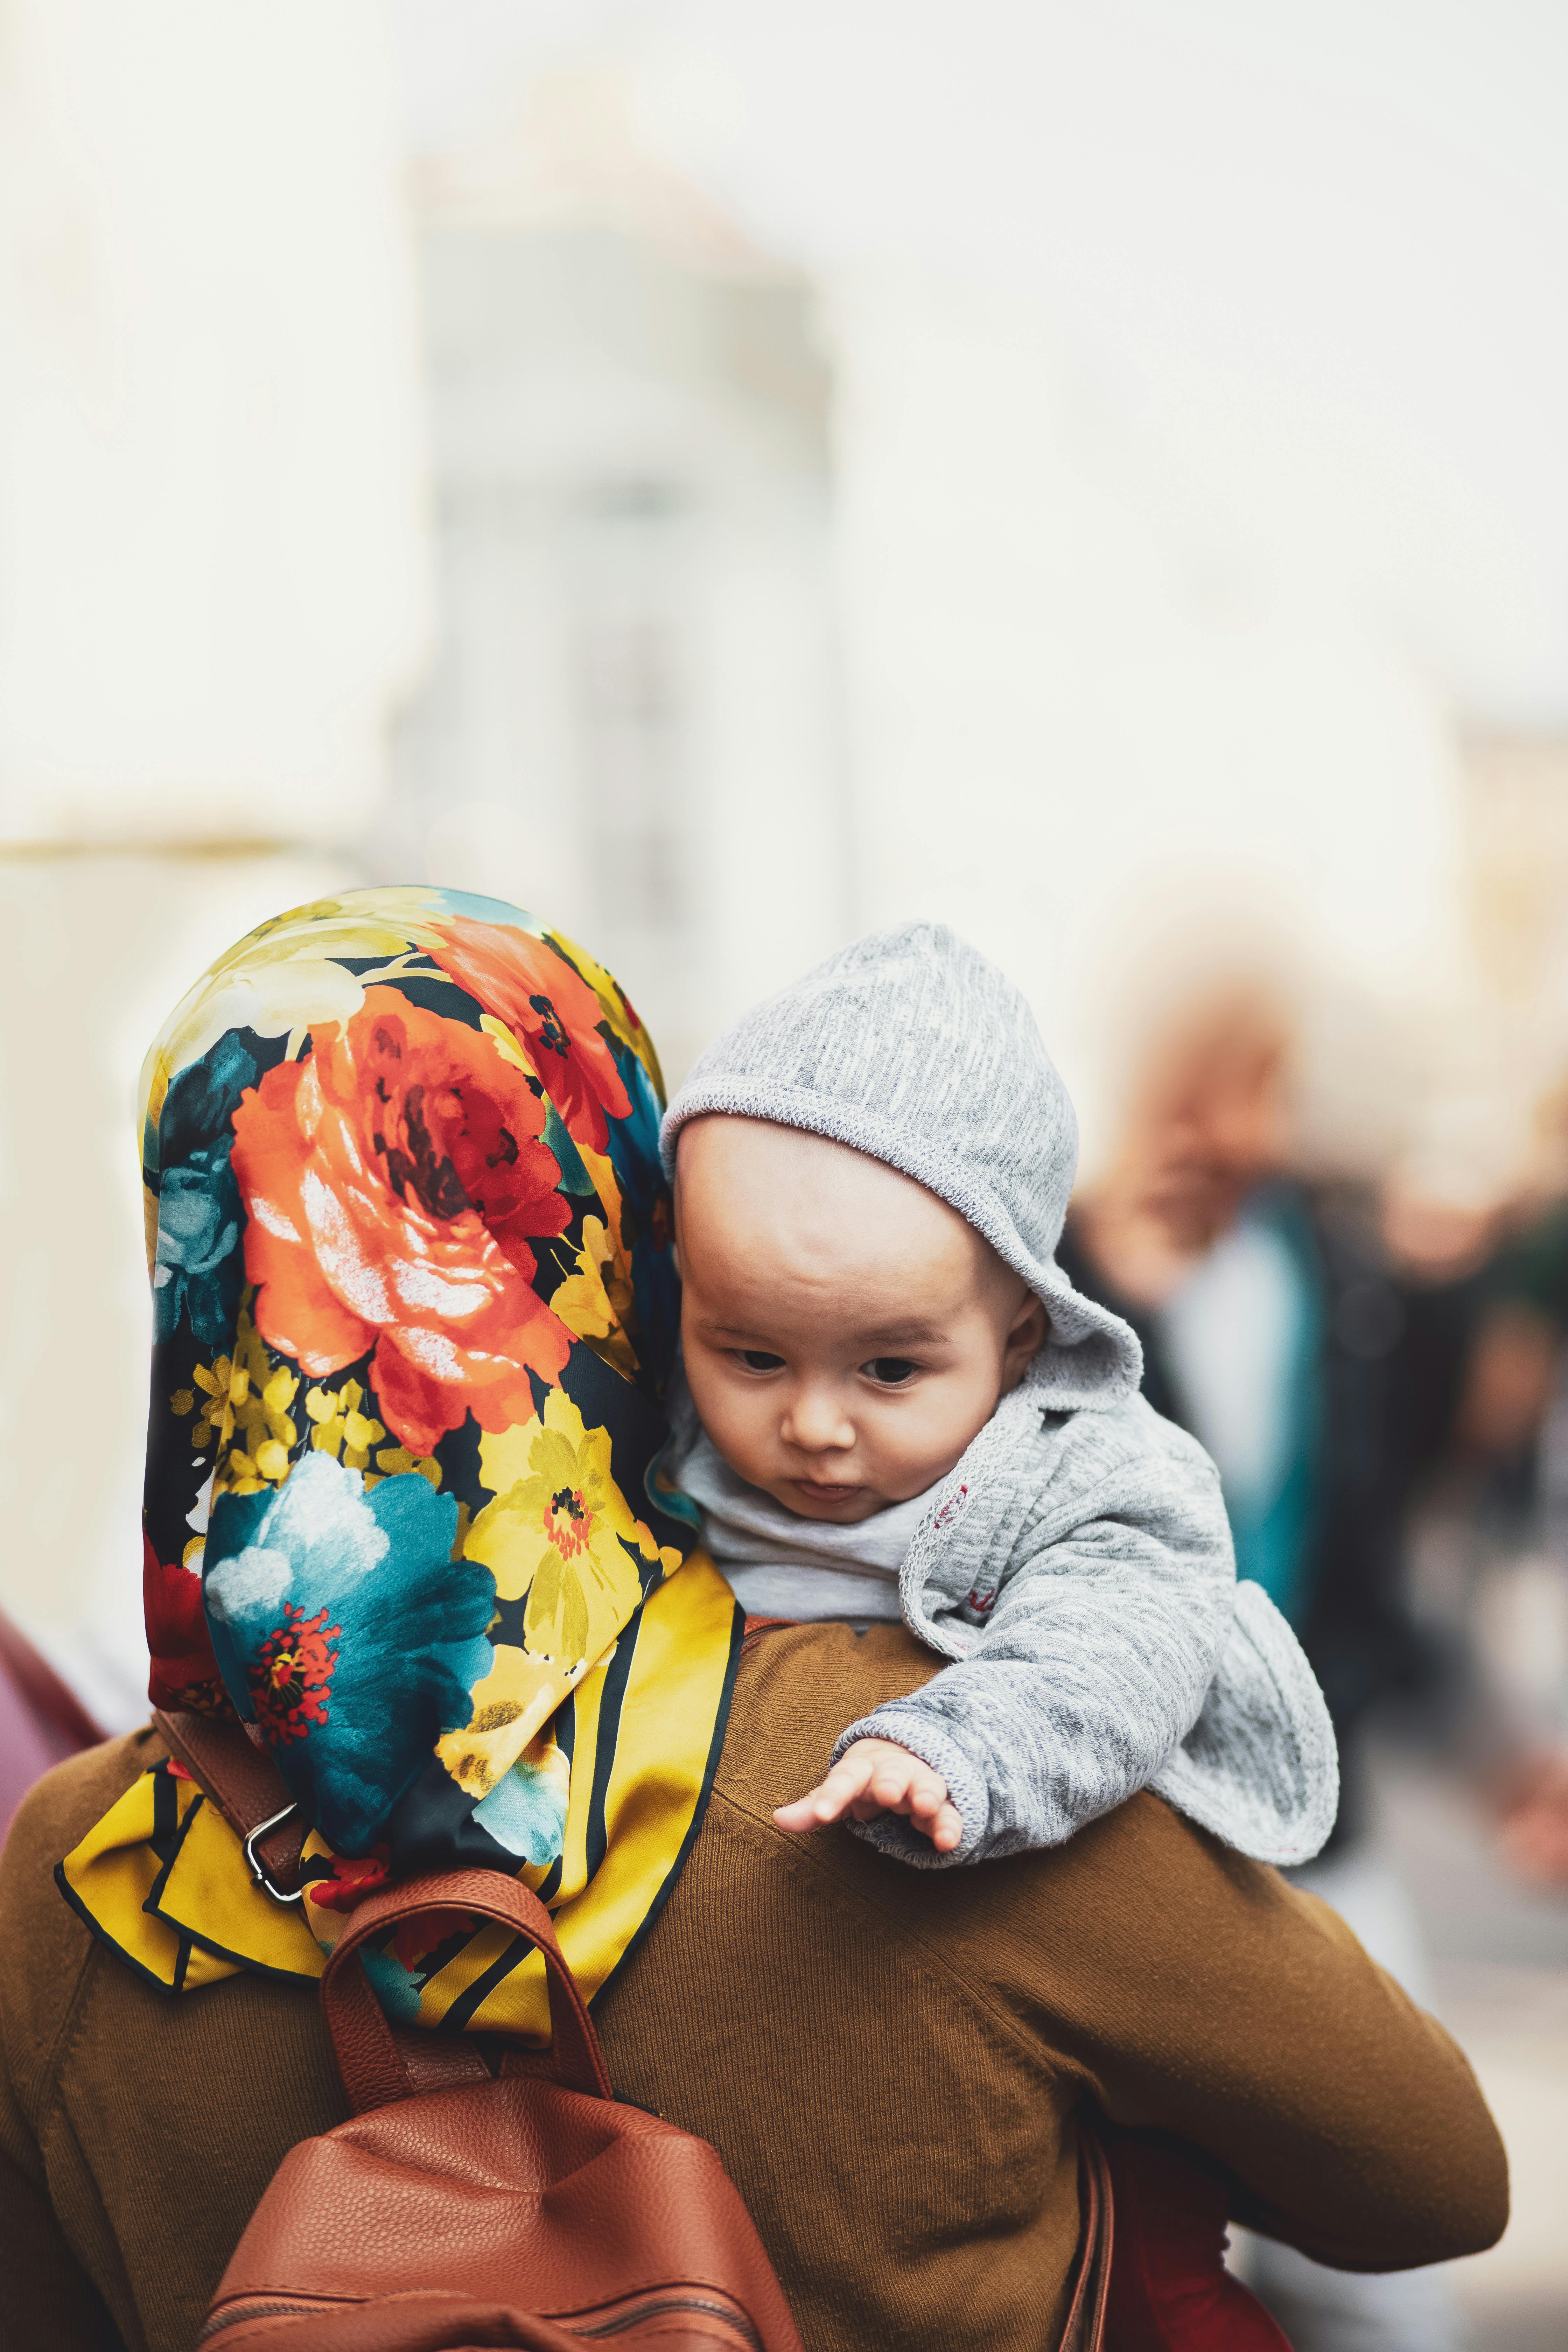 Woman carrying a baby | Photo: Pexels